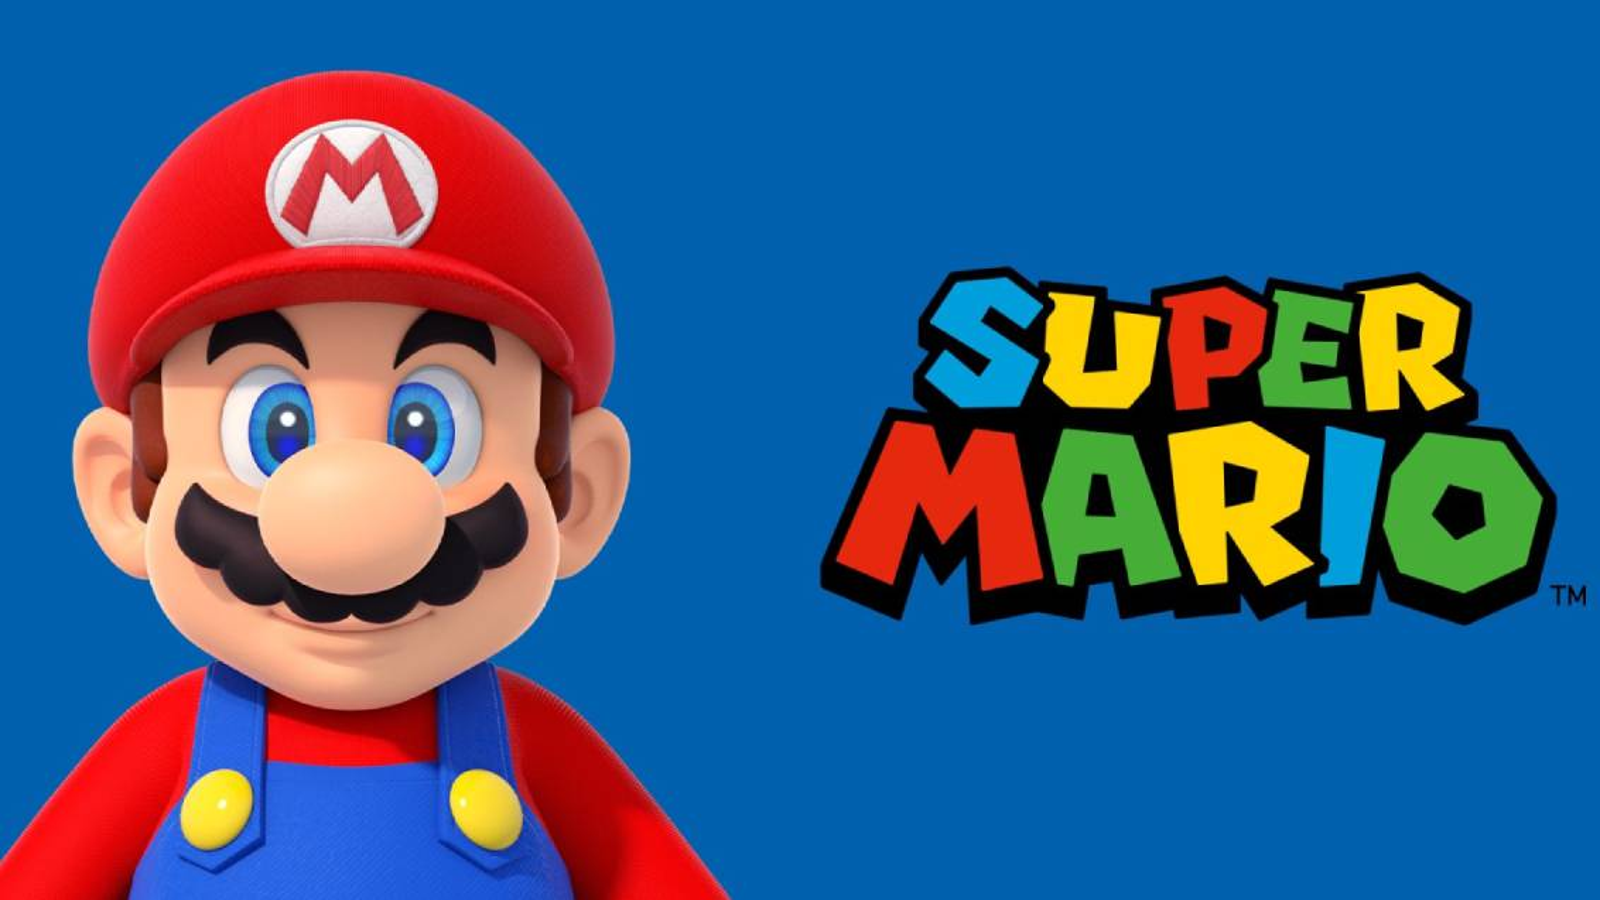 Super Mario Advance - Play Game Online